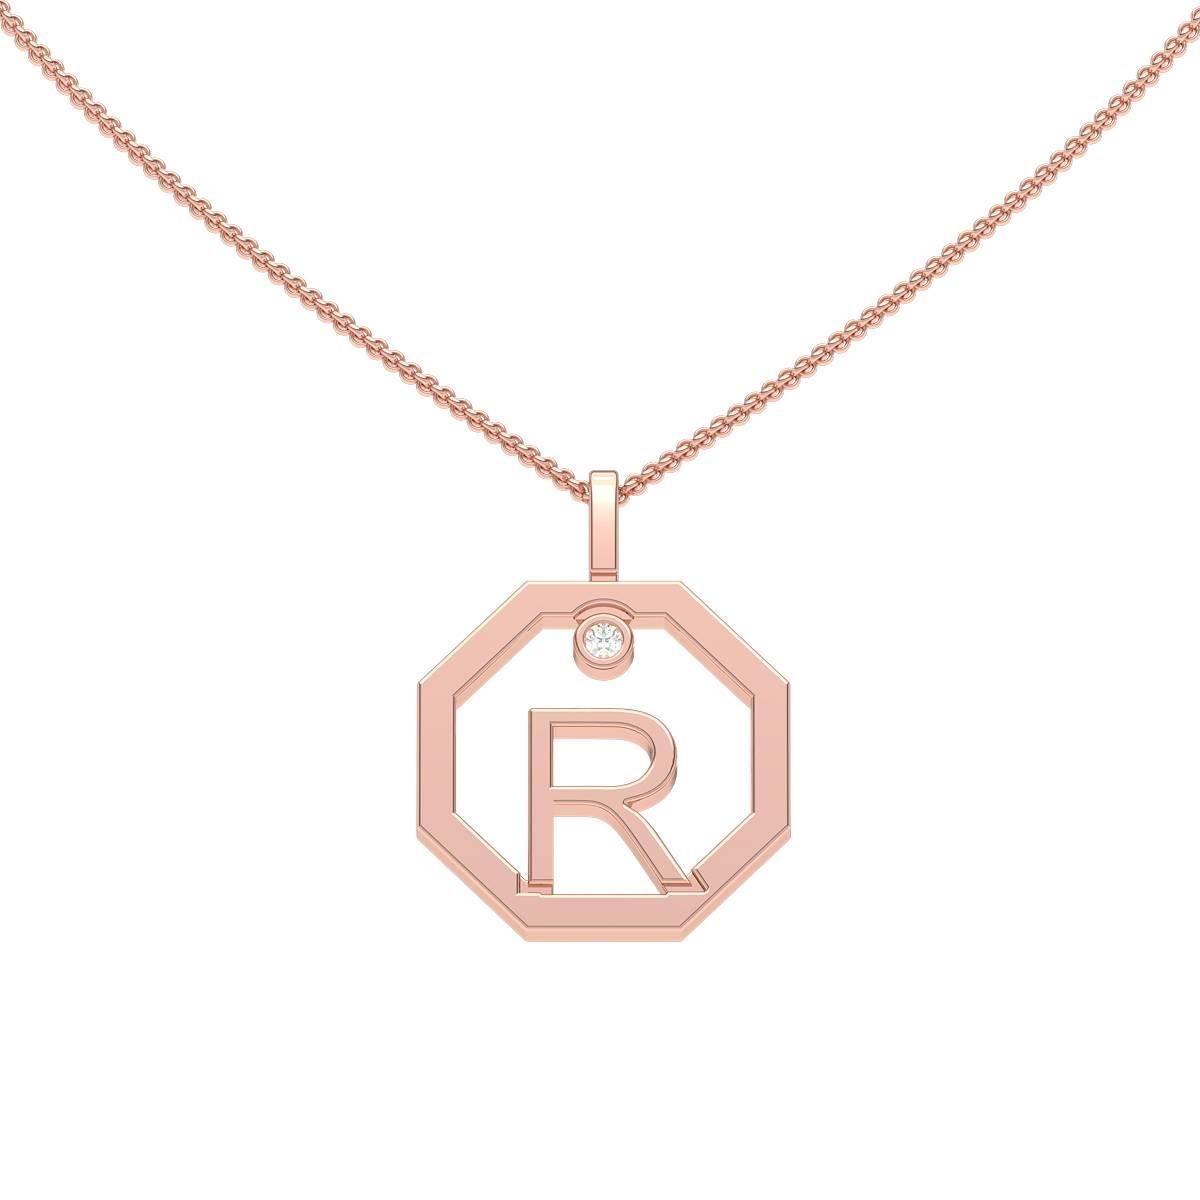 Our diamond initial pendant makes the perfect personalised gift. Handcrafted to order in our Sydney studios in 18 karat yellow/white/rose gold and set with a sparkling diamond, this timeless octagonal pendant is sure to delight. Chains sold